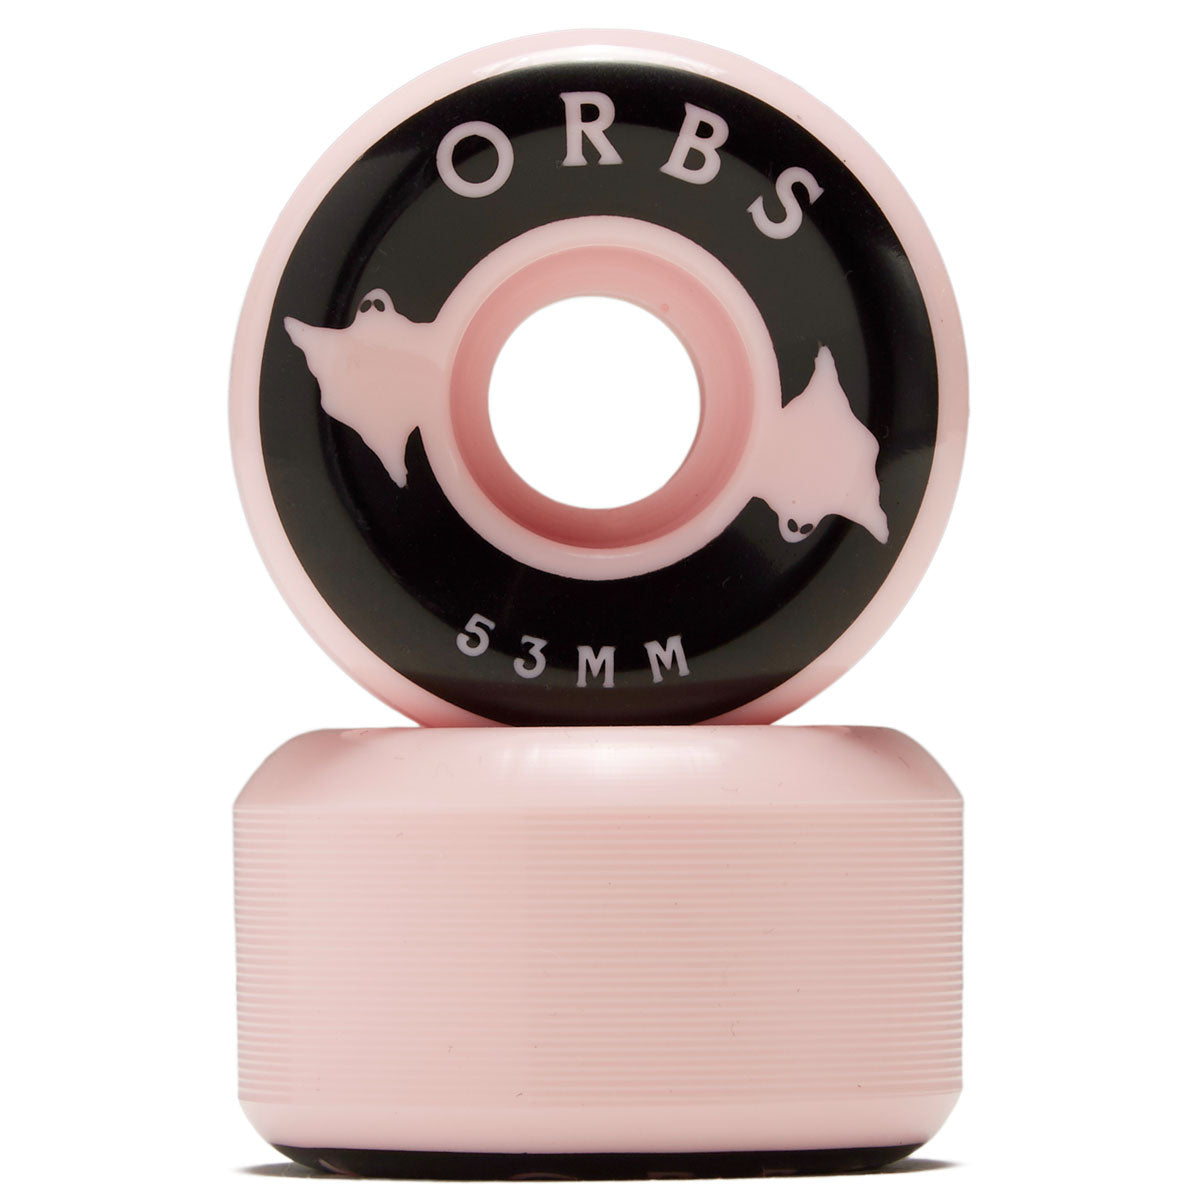 Welcome Orbs Specters Conical 99A Skateboard Wheels - Light Pink - 53mm image 2